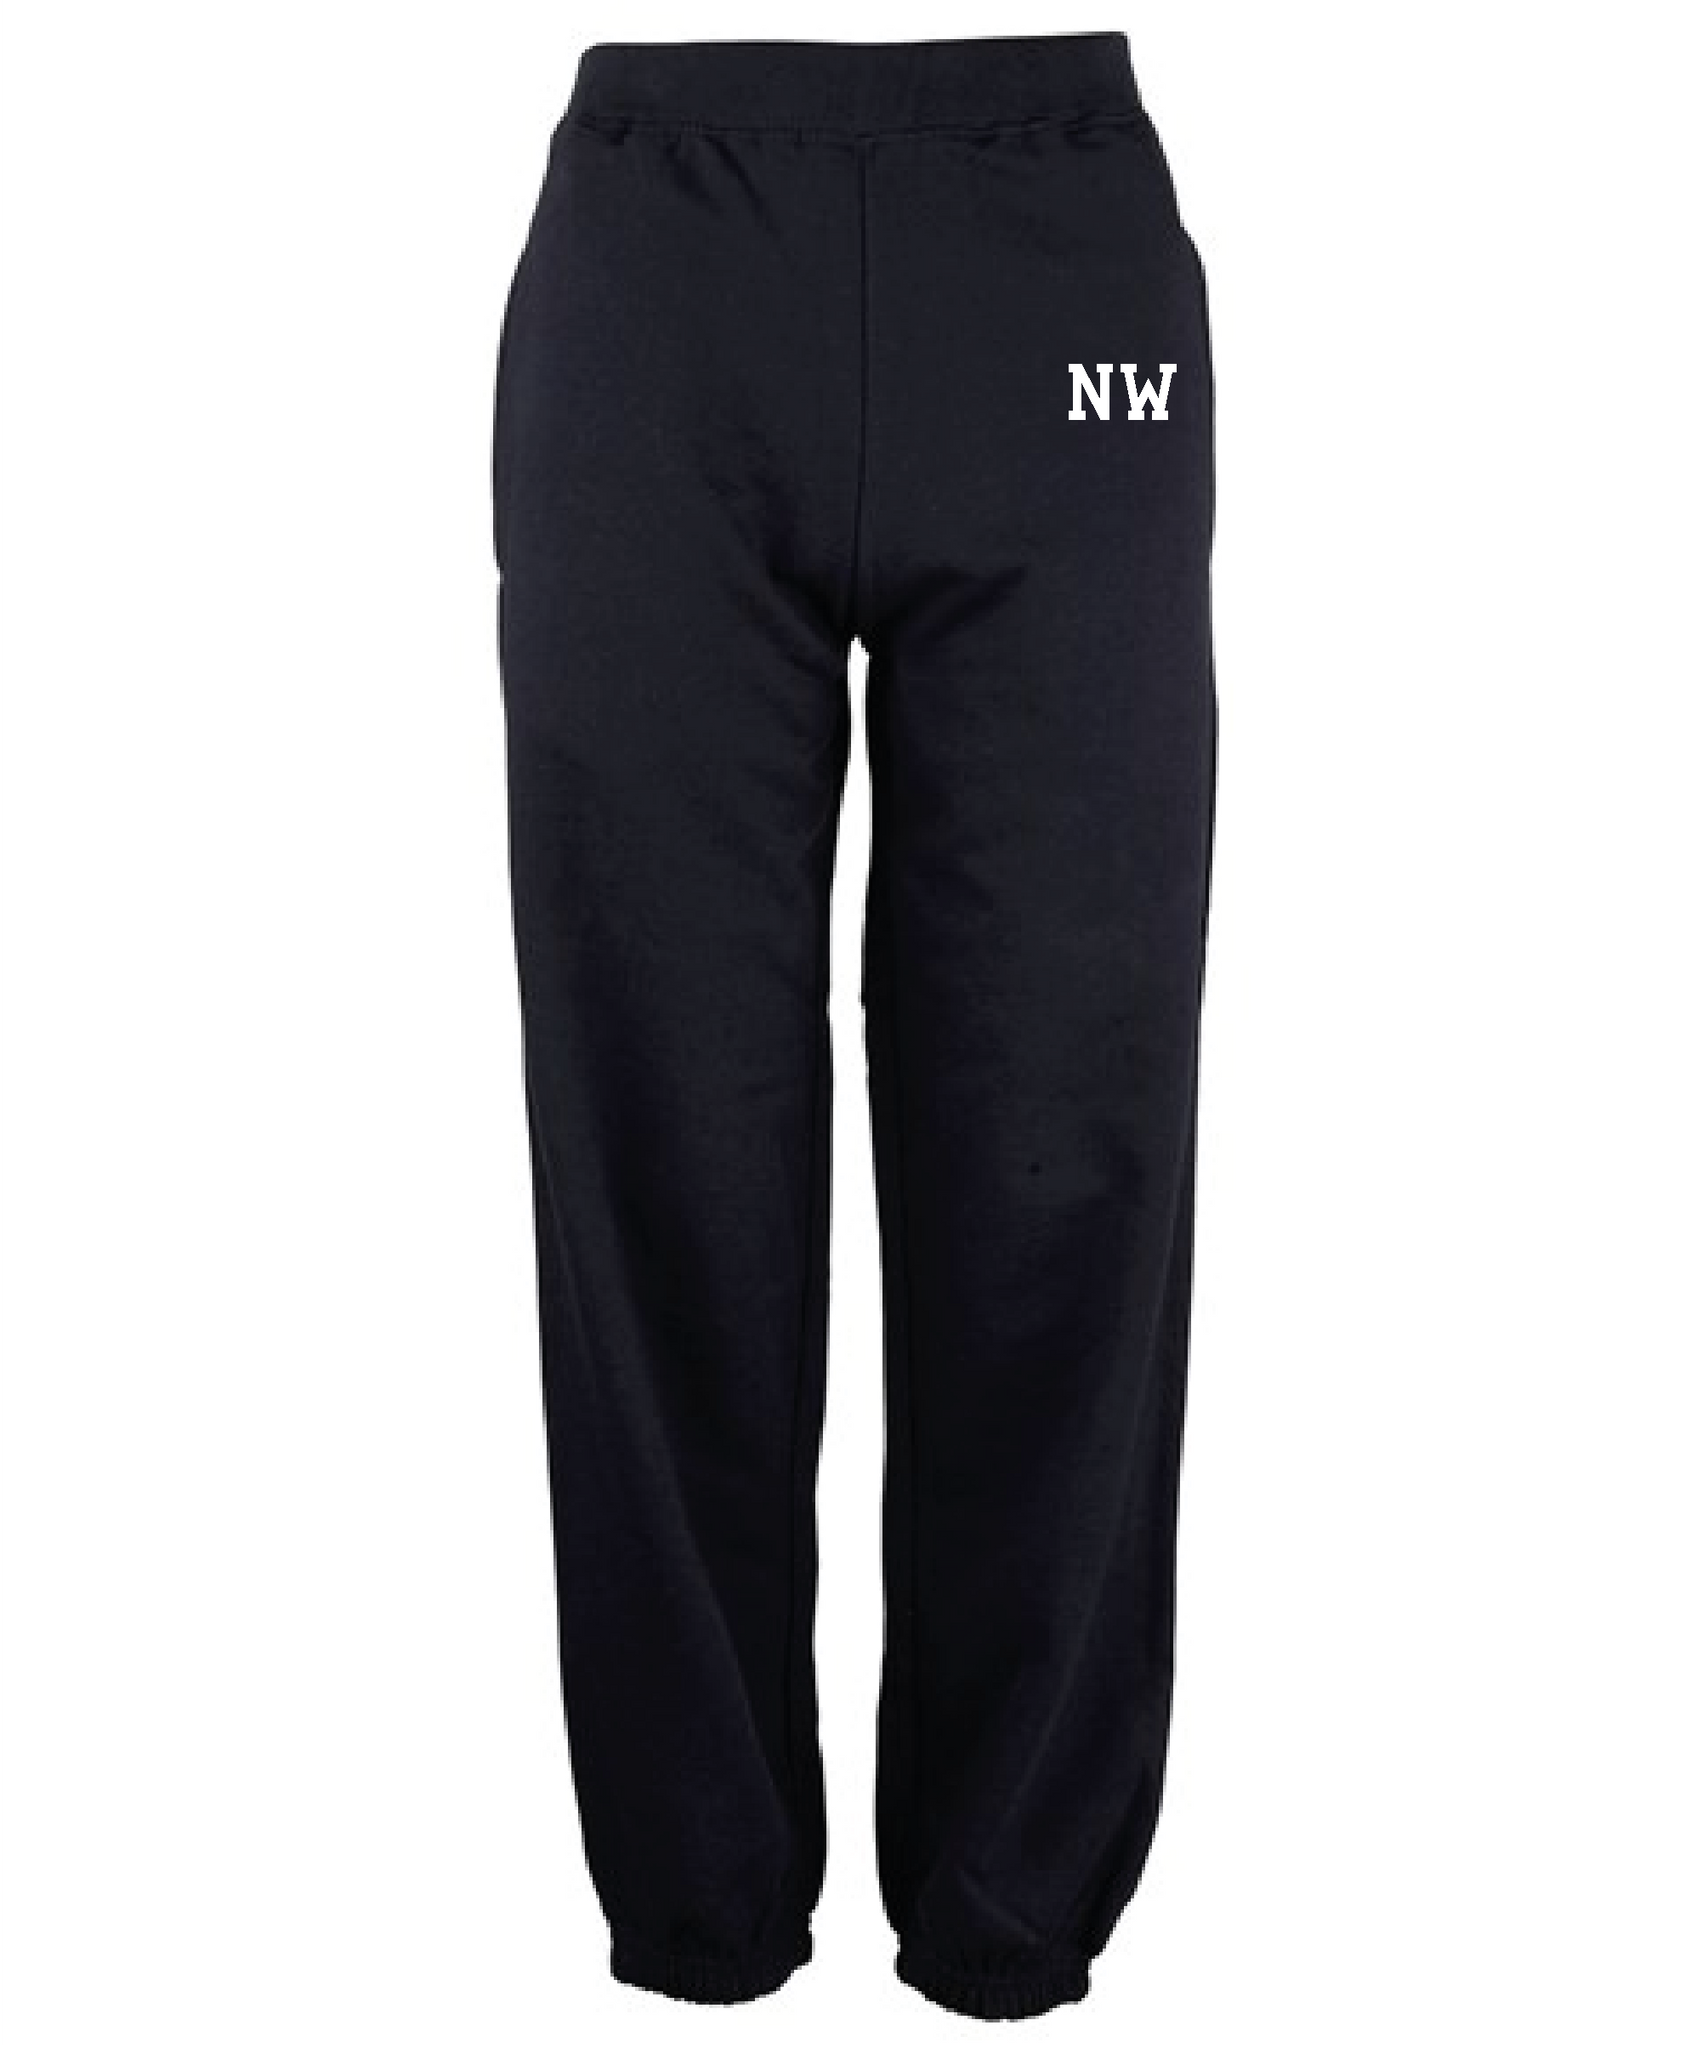 Kids "initialled" Joggers